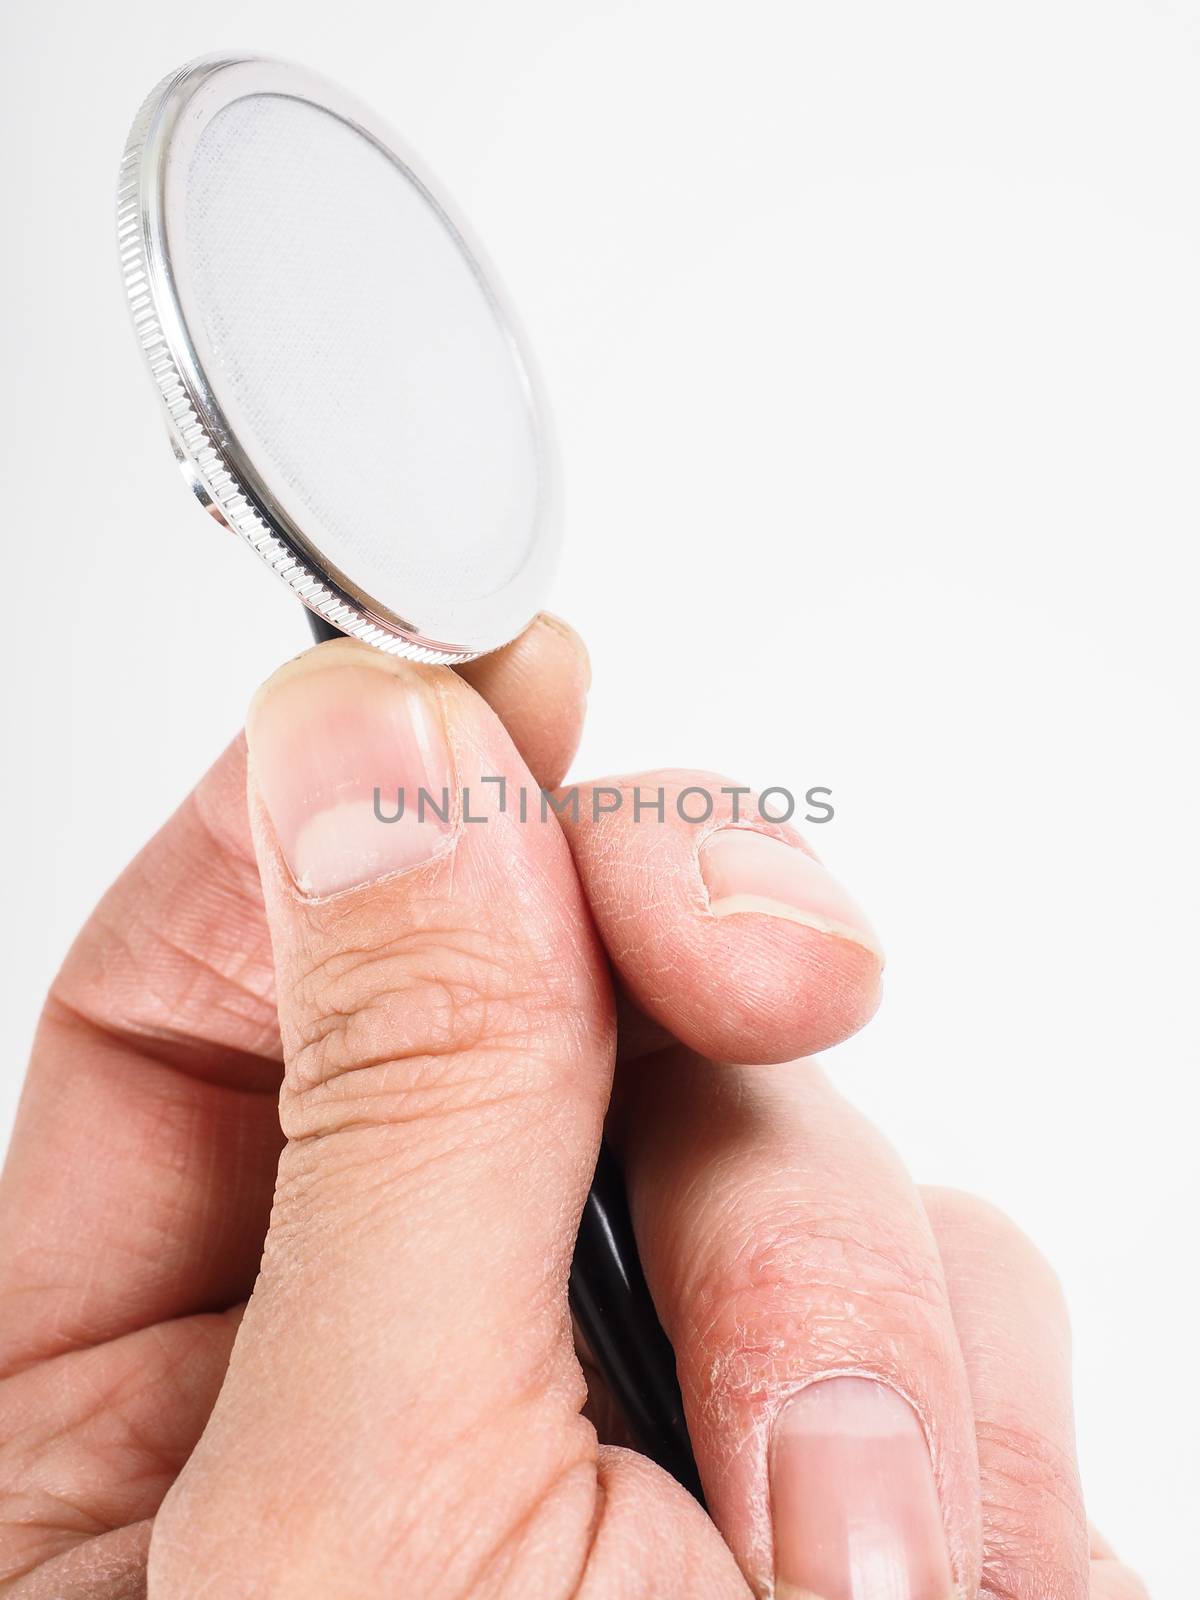 Closeup of hand holding a stethoscope towards bright background